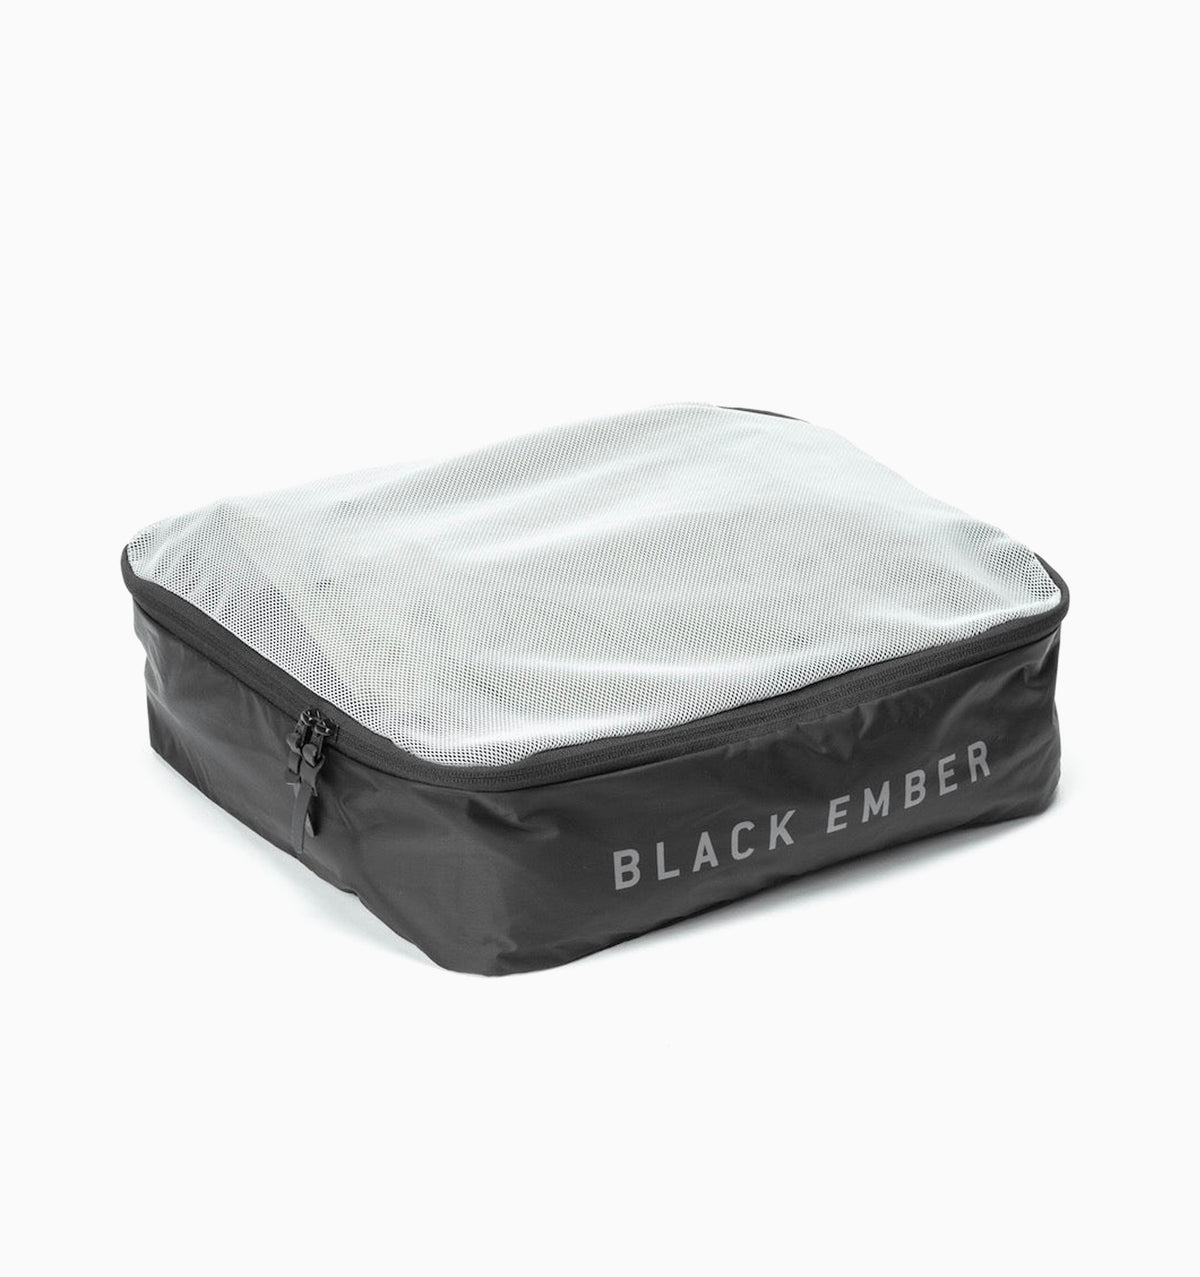 BE Packing Cube - Large - Black